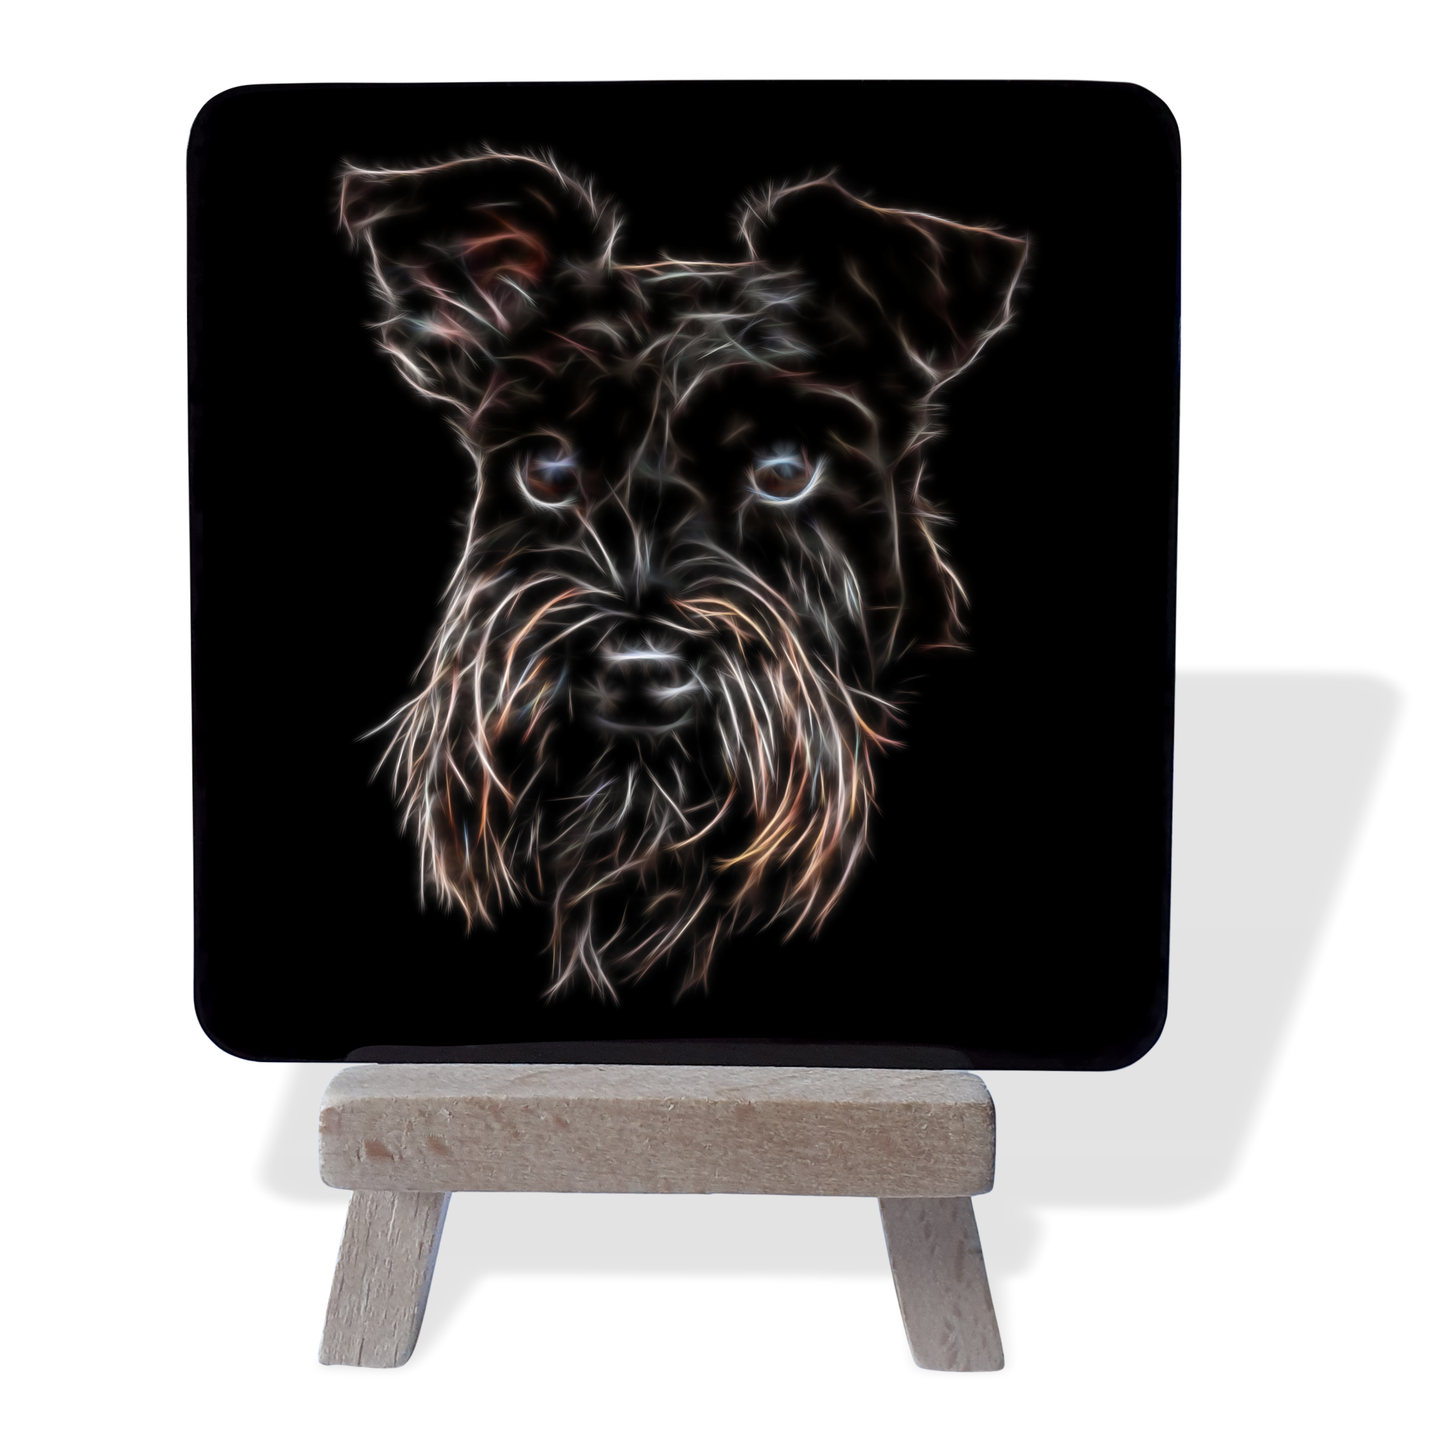 Black Schnauzer #4 Metal Plaque and Mini Easel with Fractal Art Design